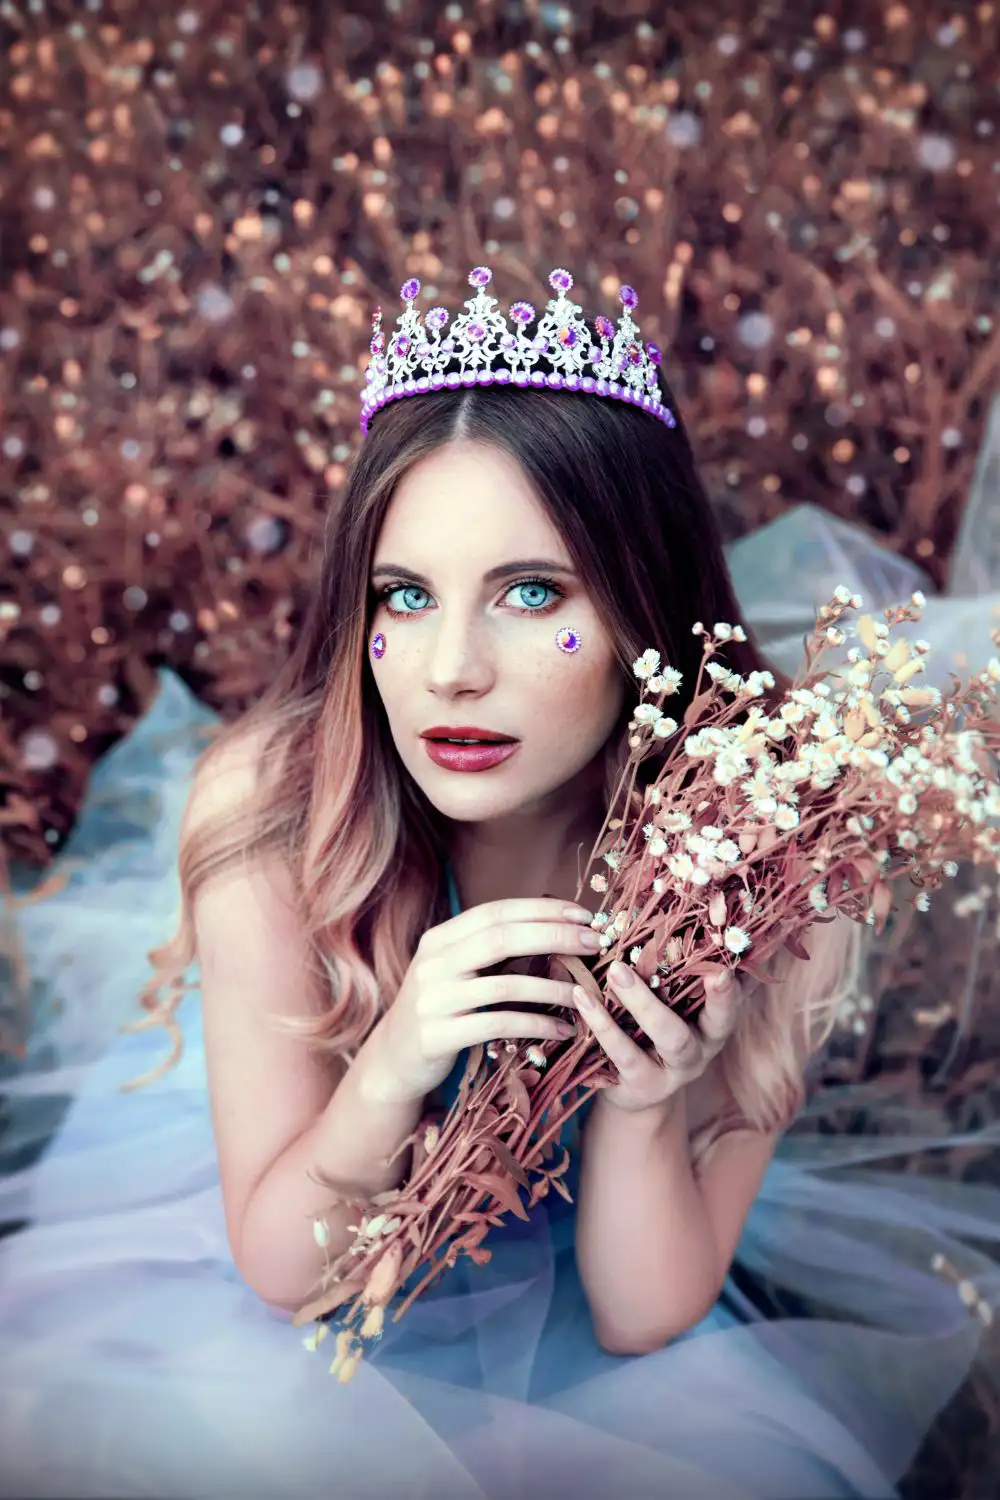 Young lady with tiara